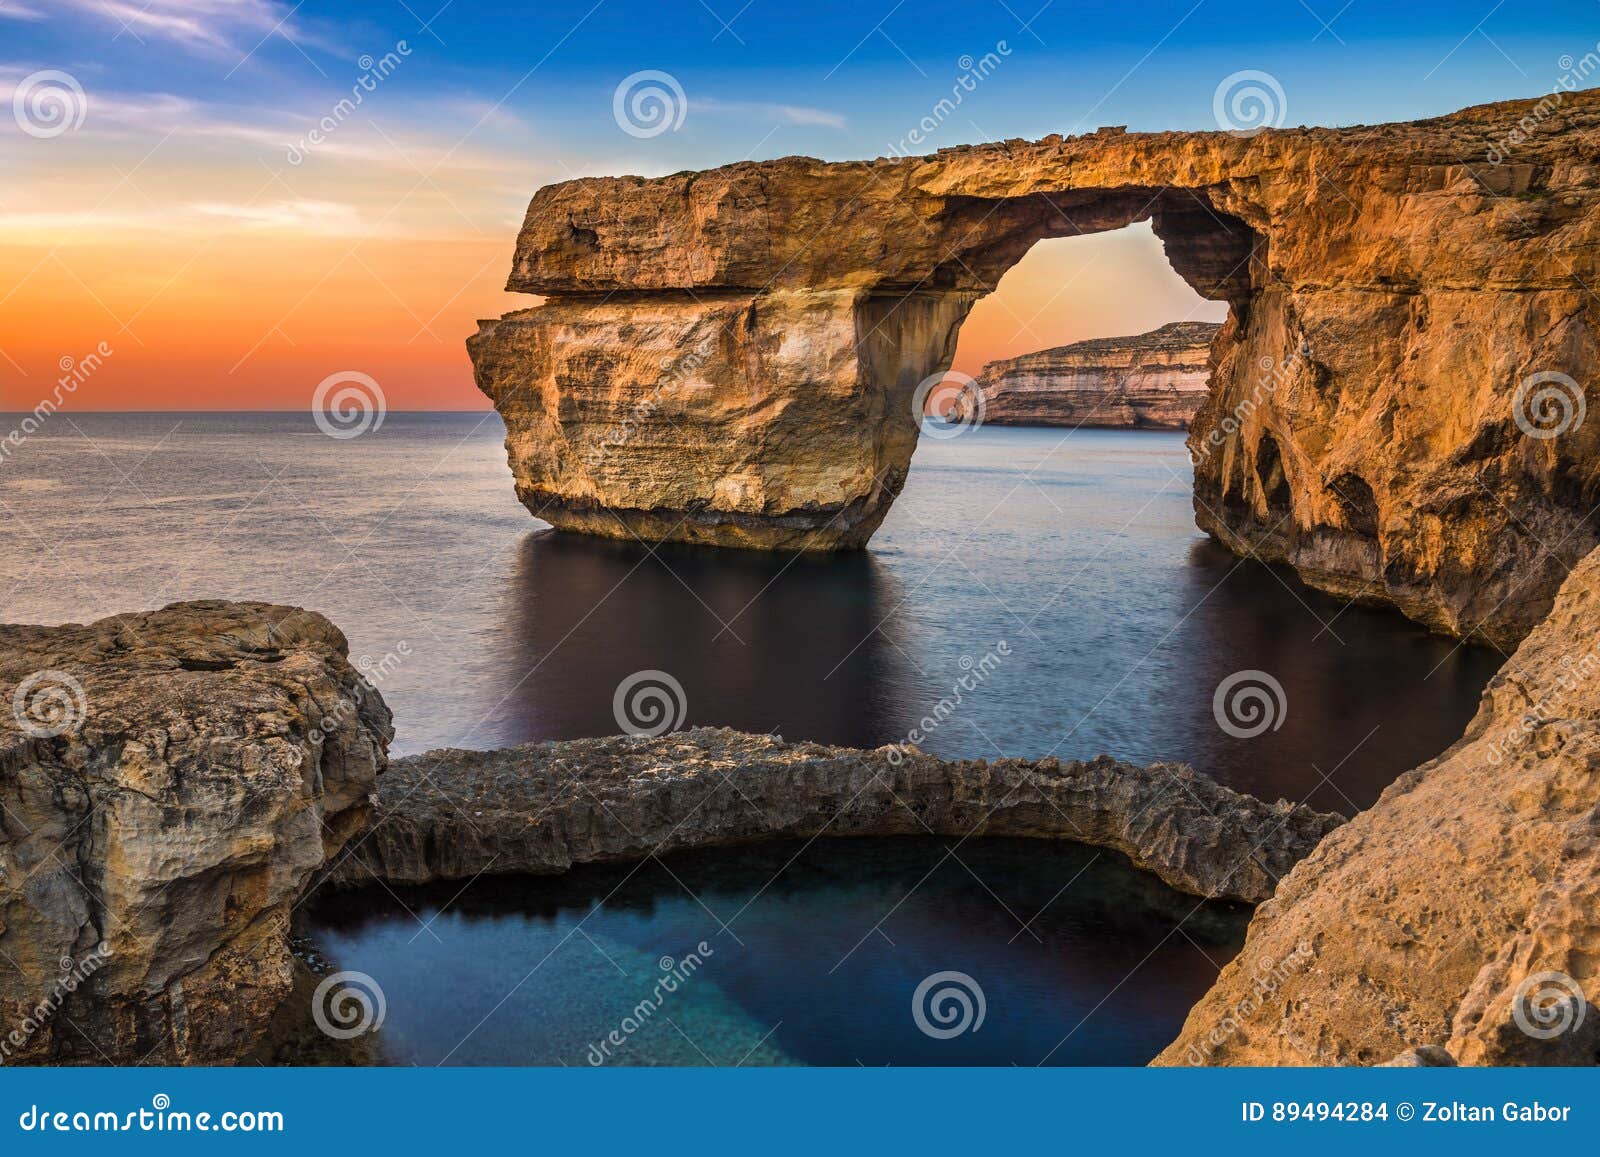 4 950 Azure Window Photos Free Royalty Free Stock Photos From Dreamstime